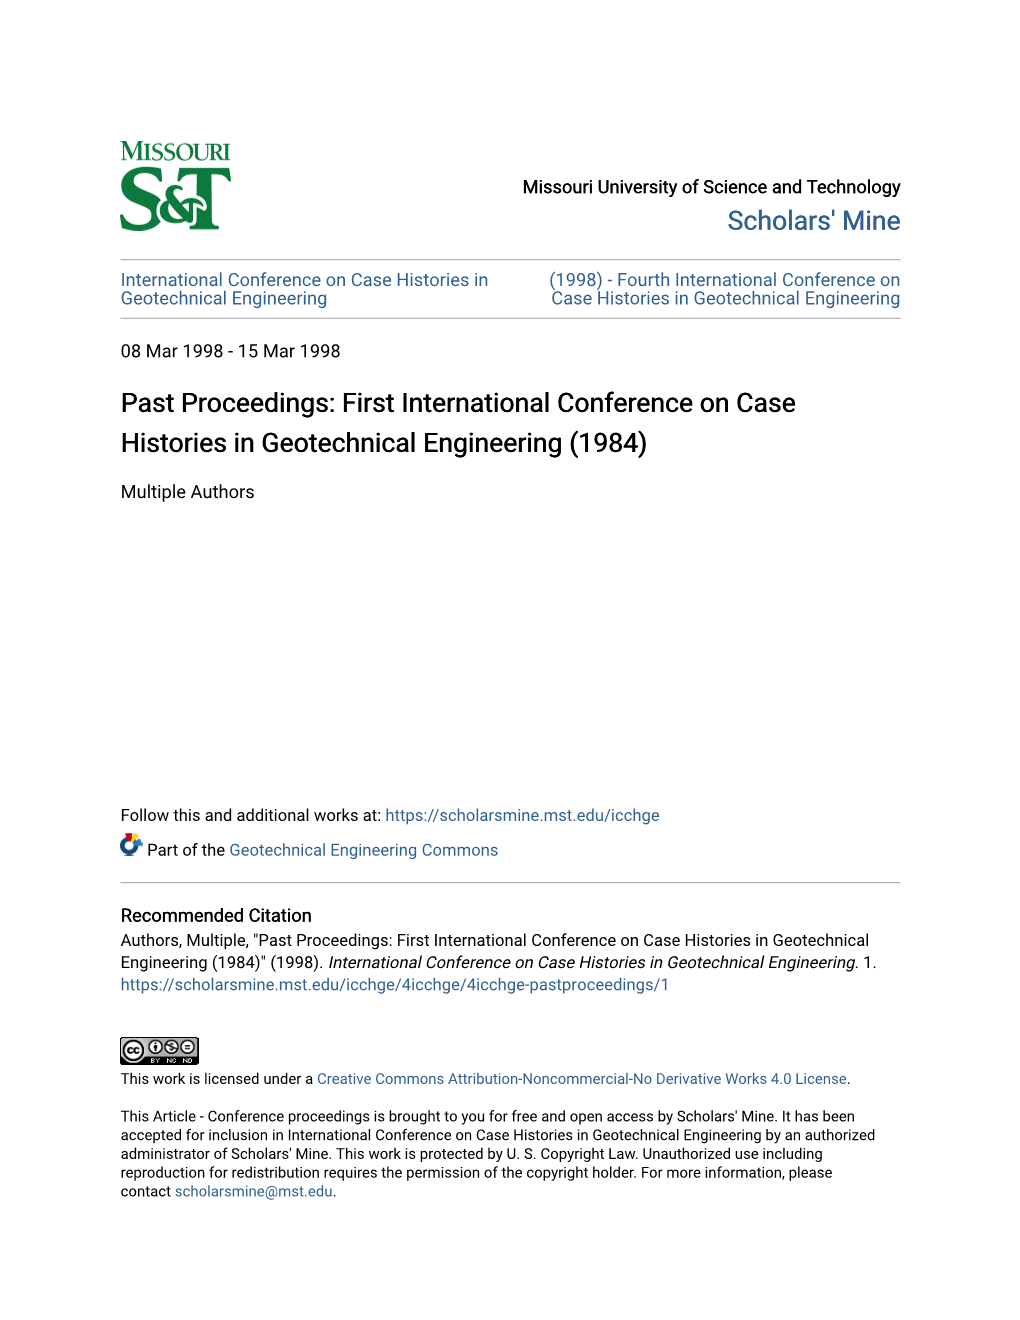 First International Conference on Case Histories in Geotechnical Engineering (1984)